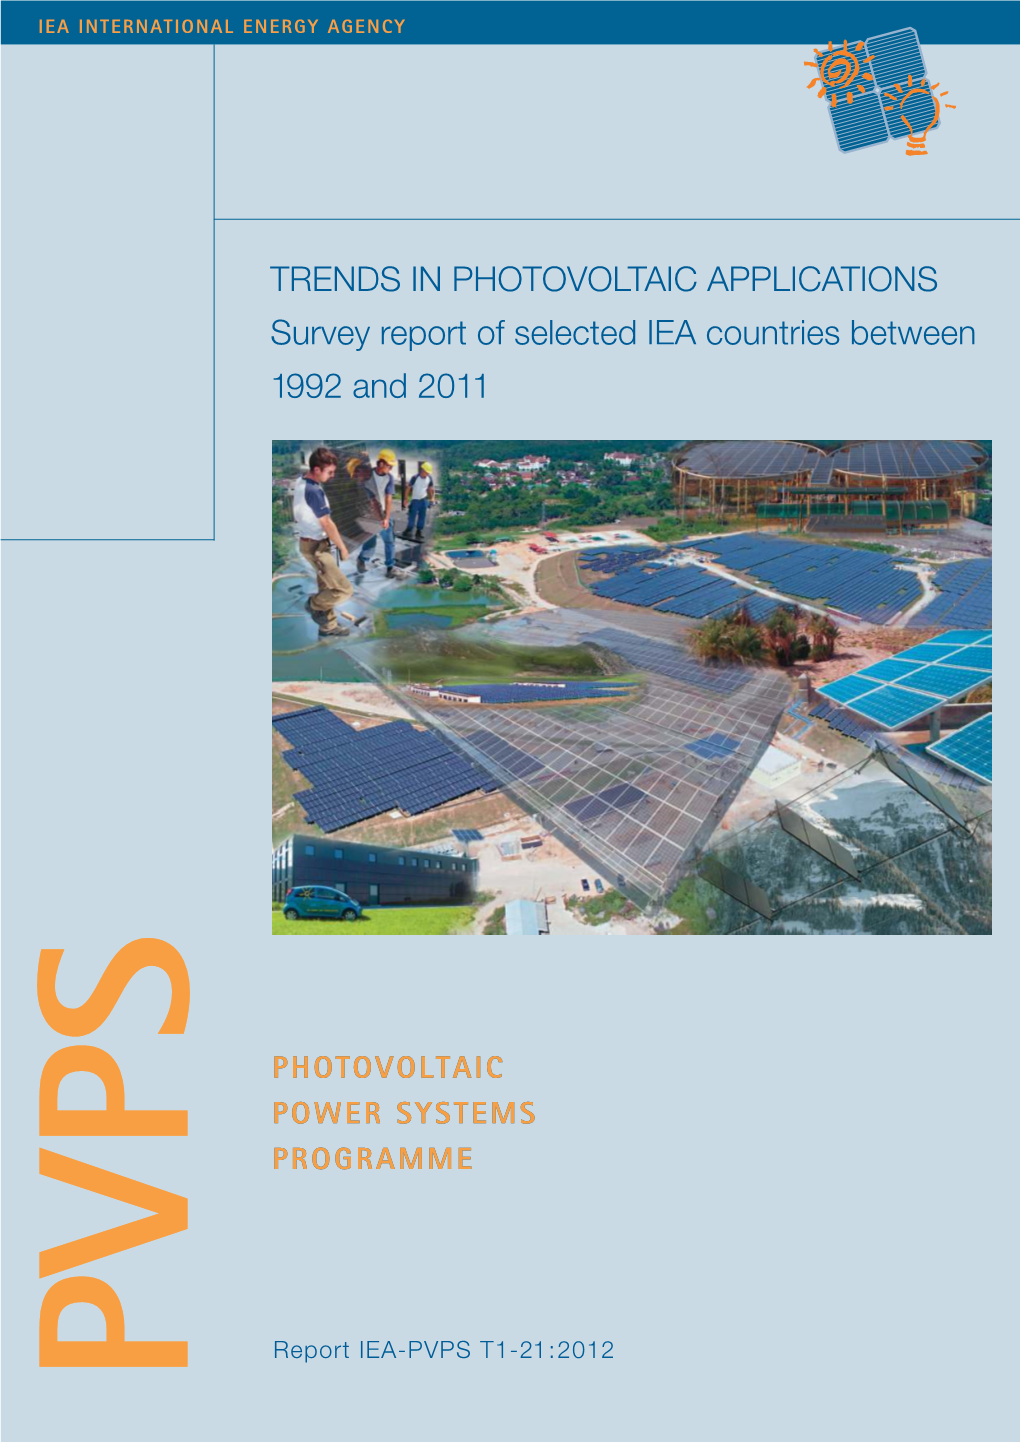 TRENDS in PHOTOVOLTAIC APPLICATIONS Survey Report of Selected IEA Countries Between 1992 and 2011